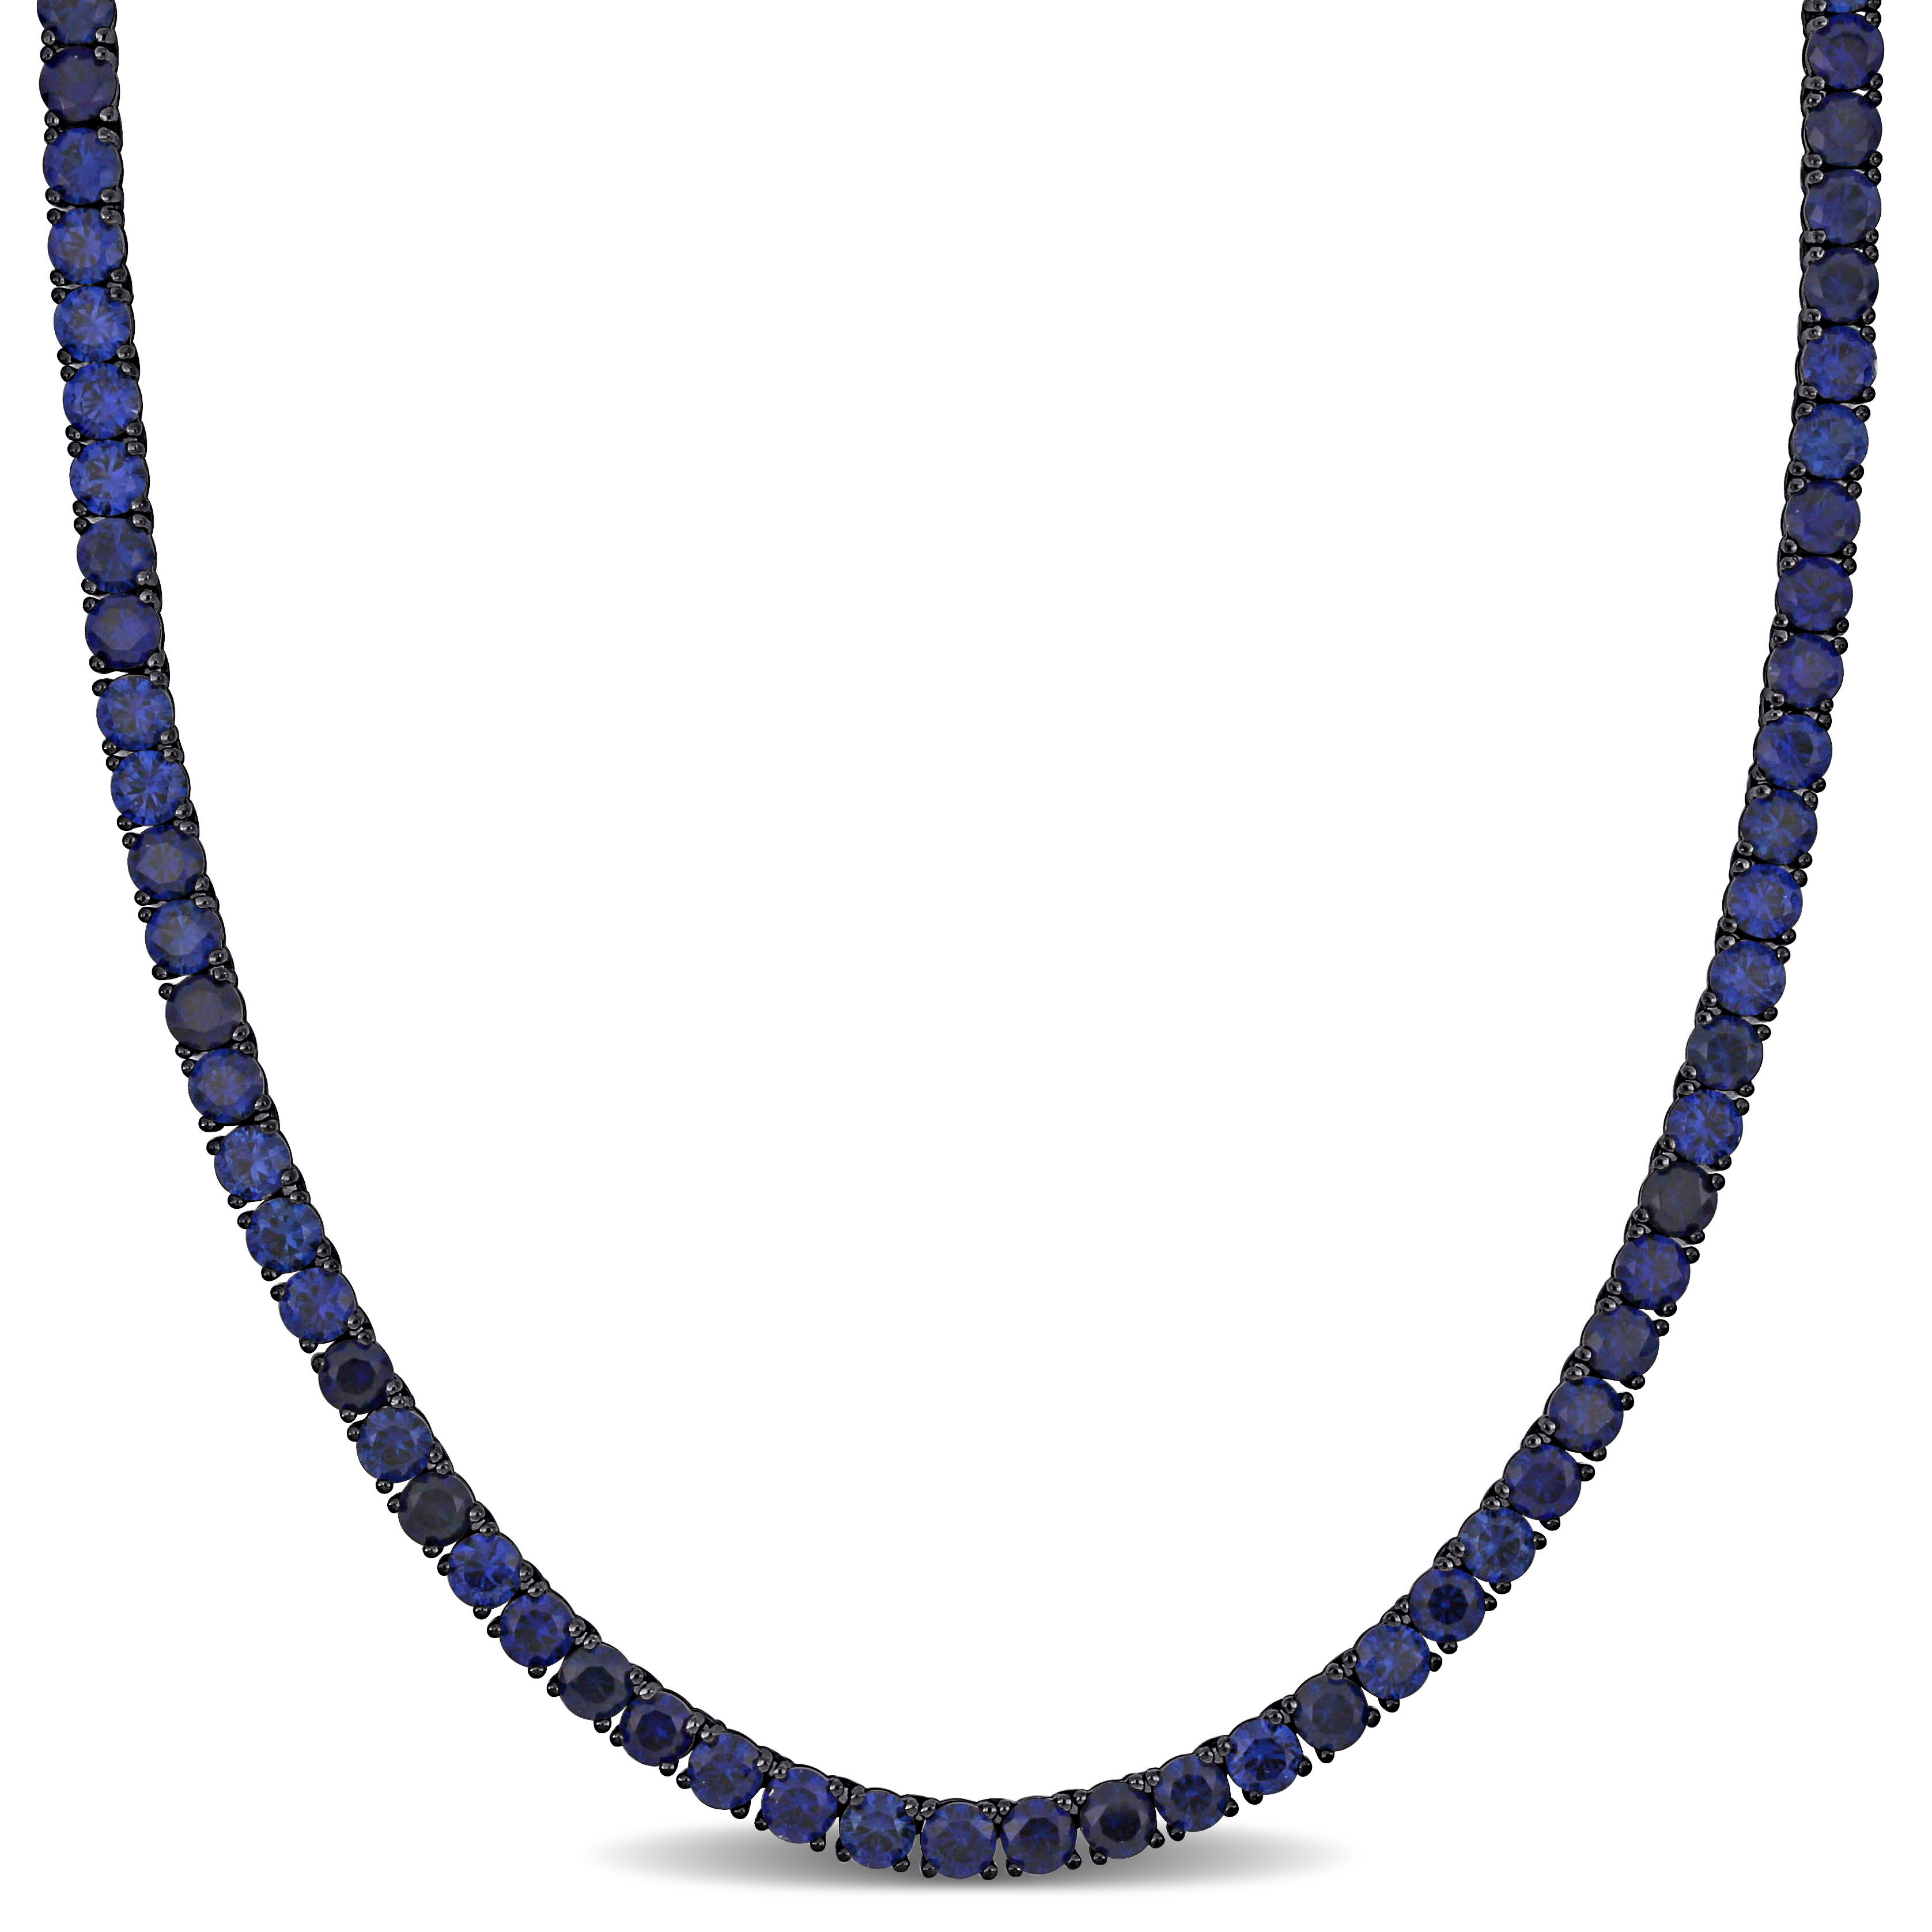 40 1/4 CT TGW Created Blue Sapphire Men's Tennis Necklace in Black Rhodium Plated Sterling Silver - 20 in